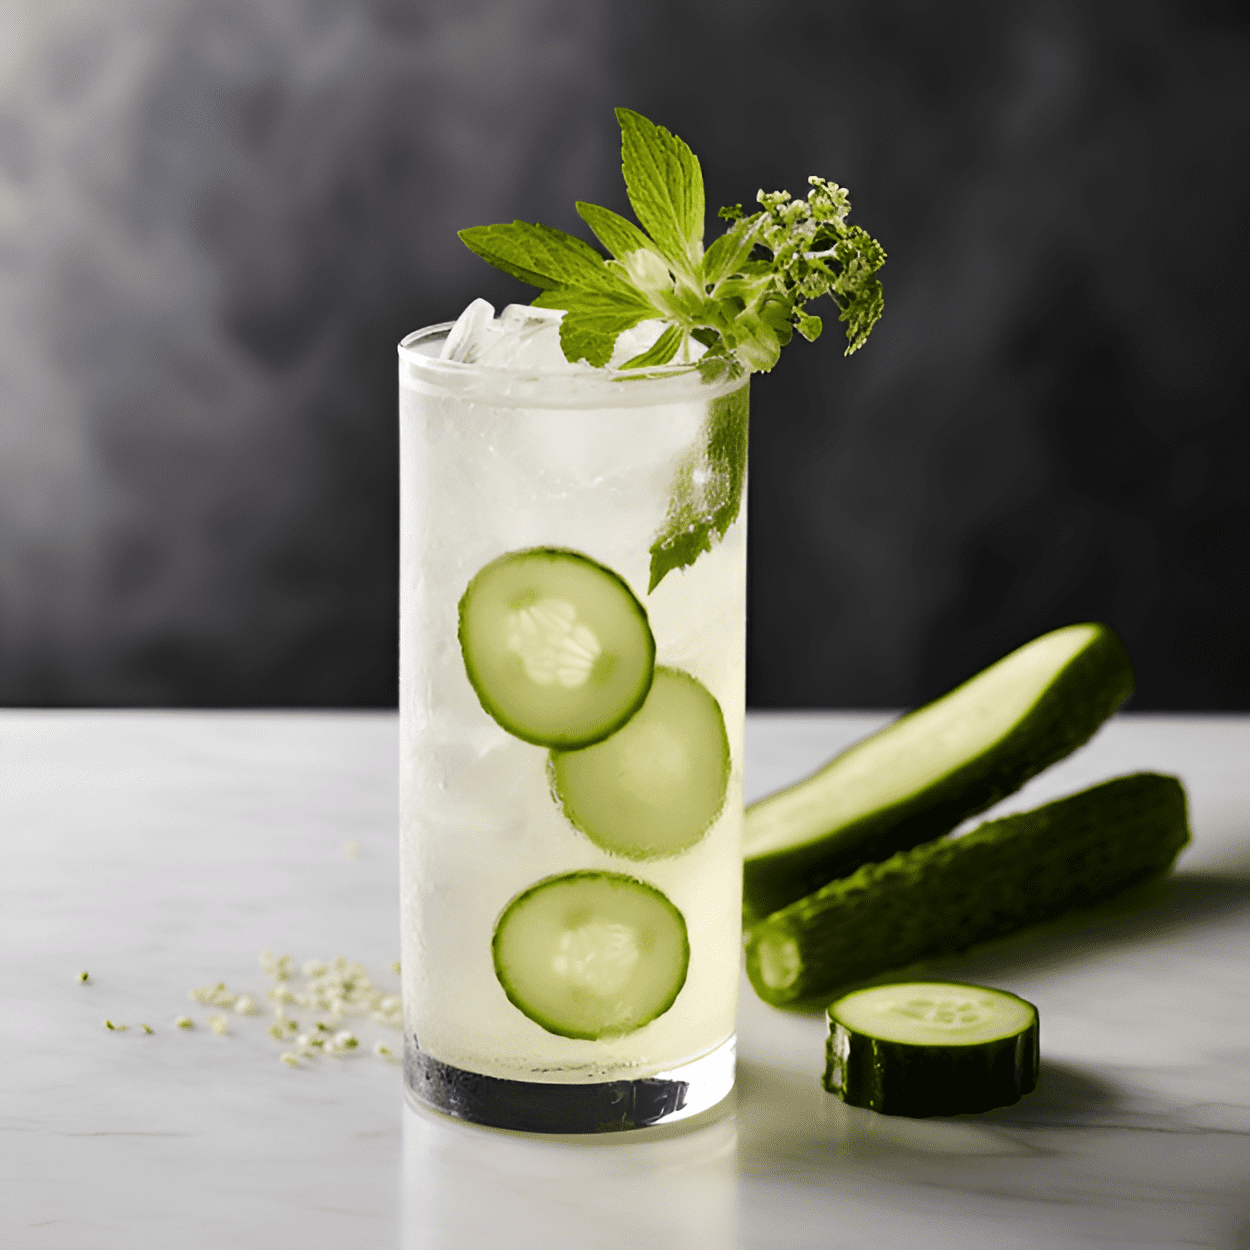 White Linen Cocktail Recipe - The White Linen is a light, crisp cocktail with a subtle sweetness. The gin provides a botanical backdrop, while the elderflower liqueur adds a hint of floral sweetness. The lemon juice adds a tart, refreshing edge, making it a perfect balance of flavors.